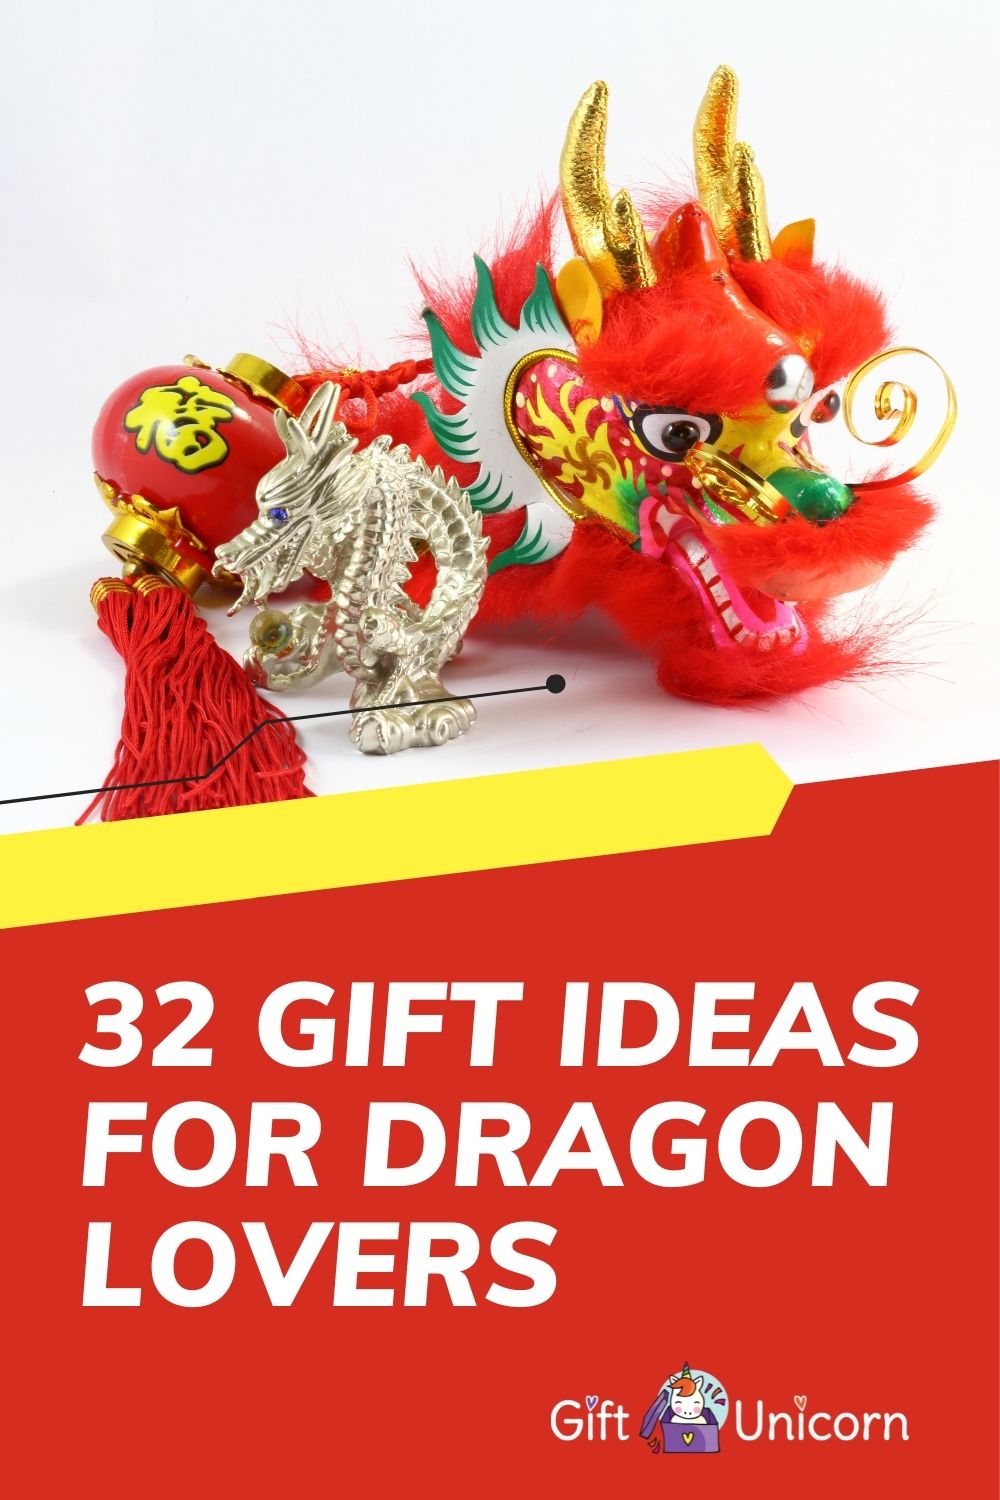 32 Gift Ideas for Dragon Lovers: Treasures Beyond Gold - pinterest pin image